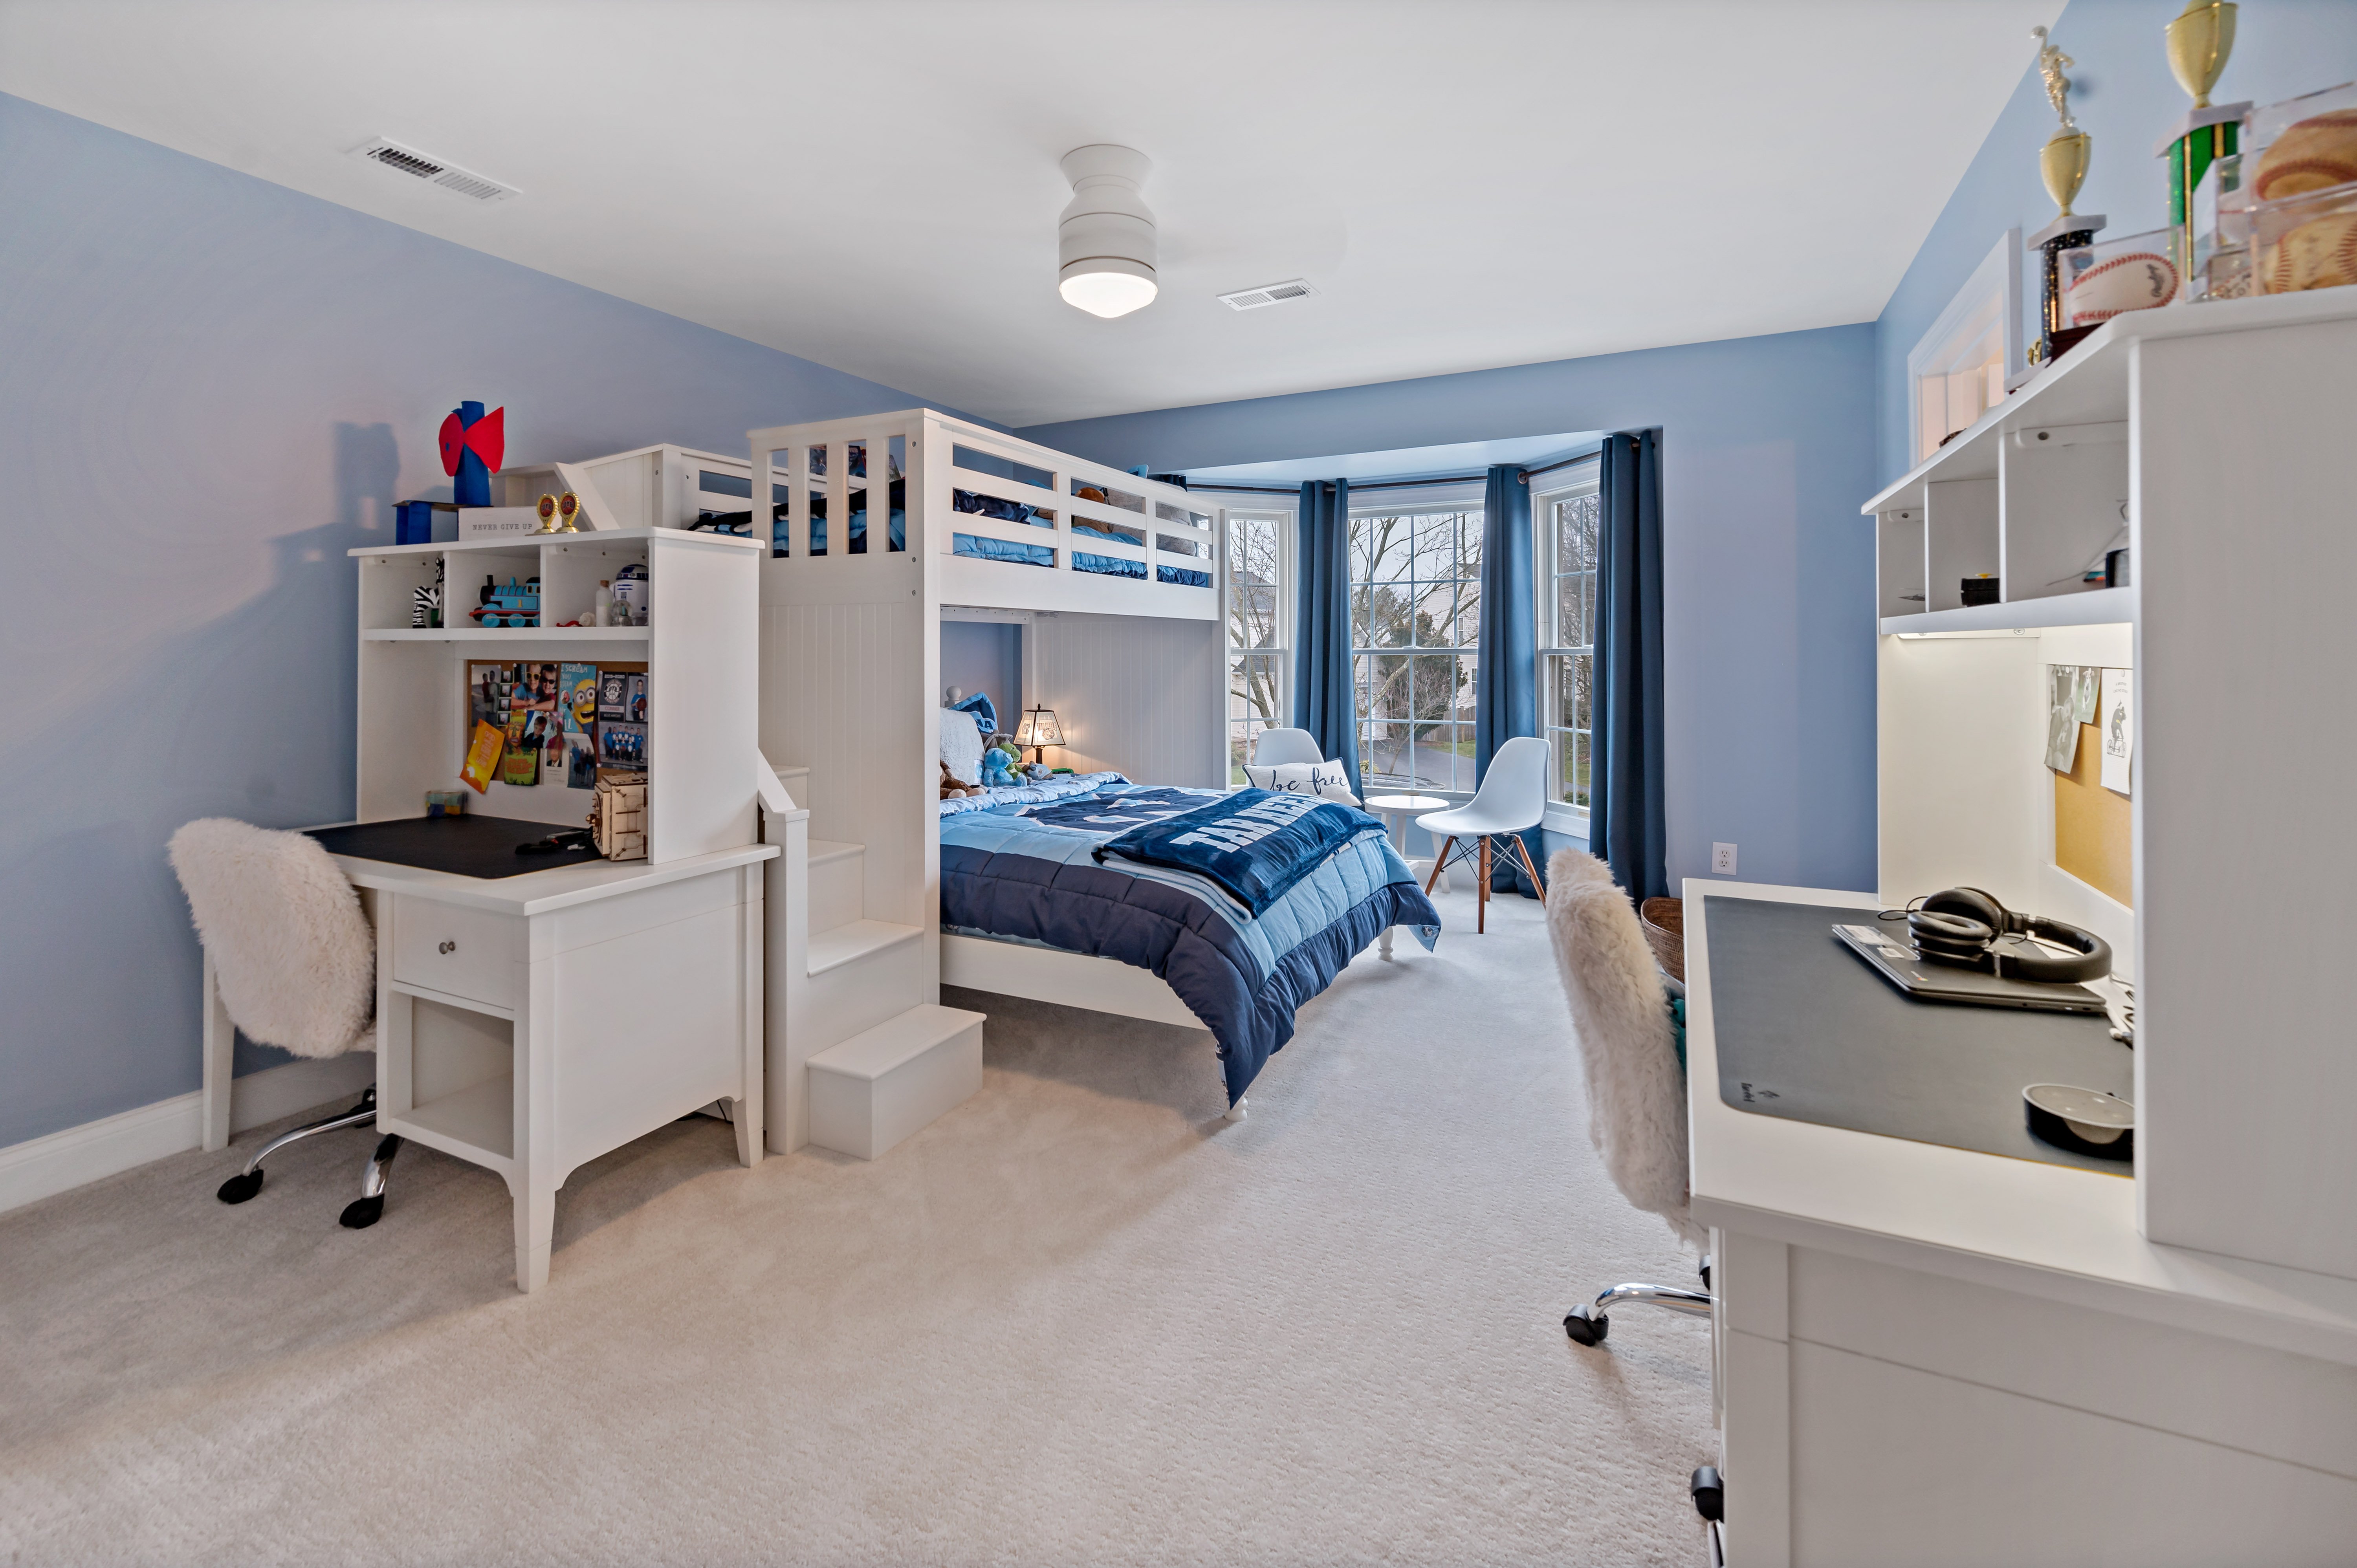 Carpeted bedroom with blue walls and white trim